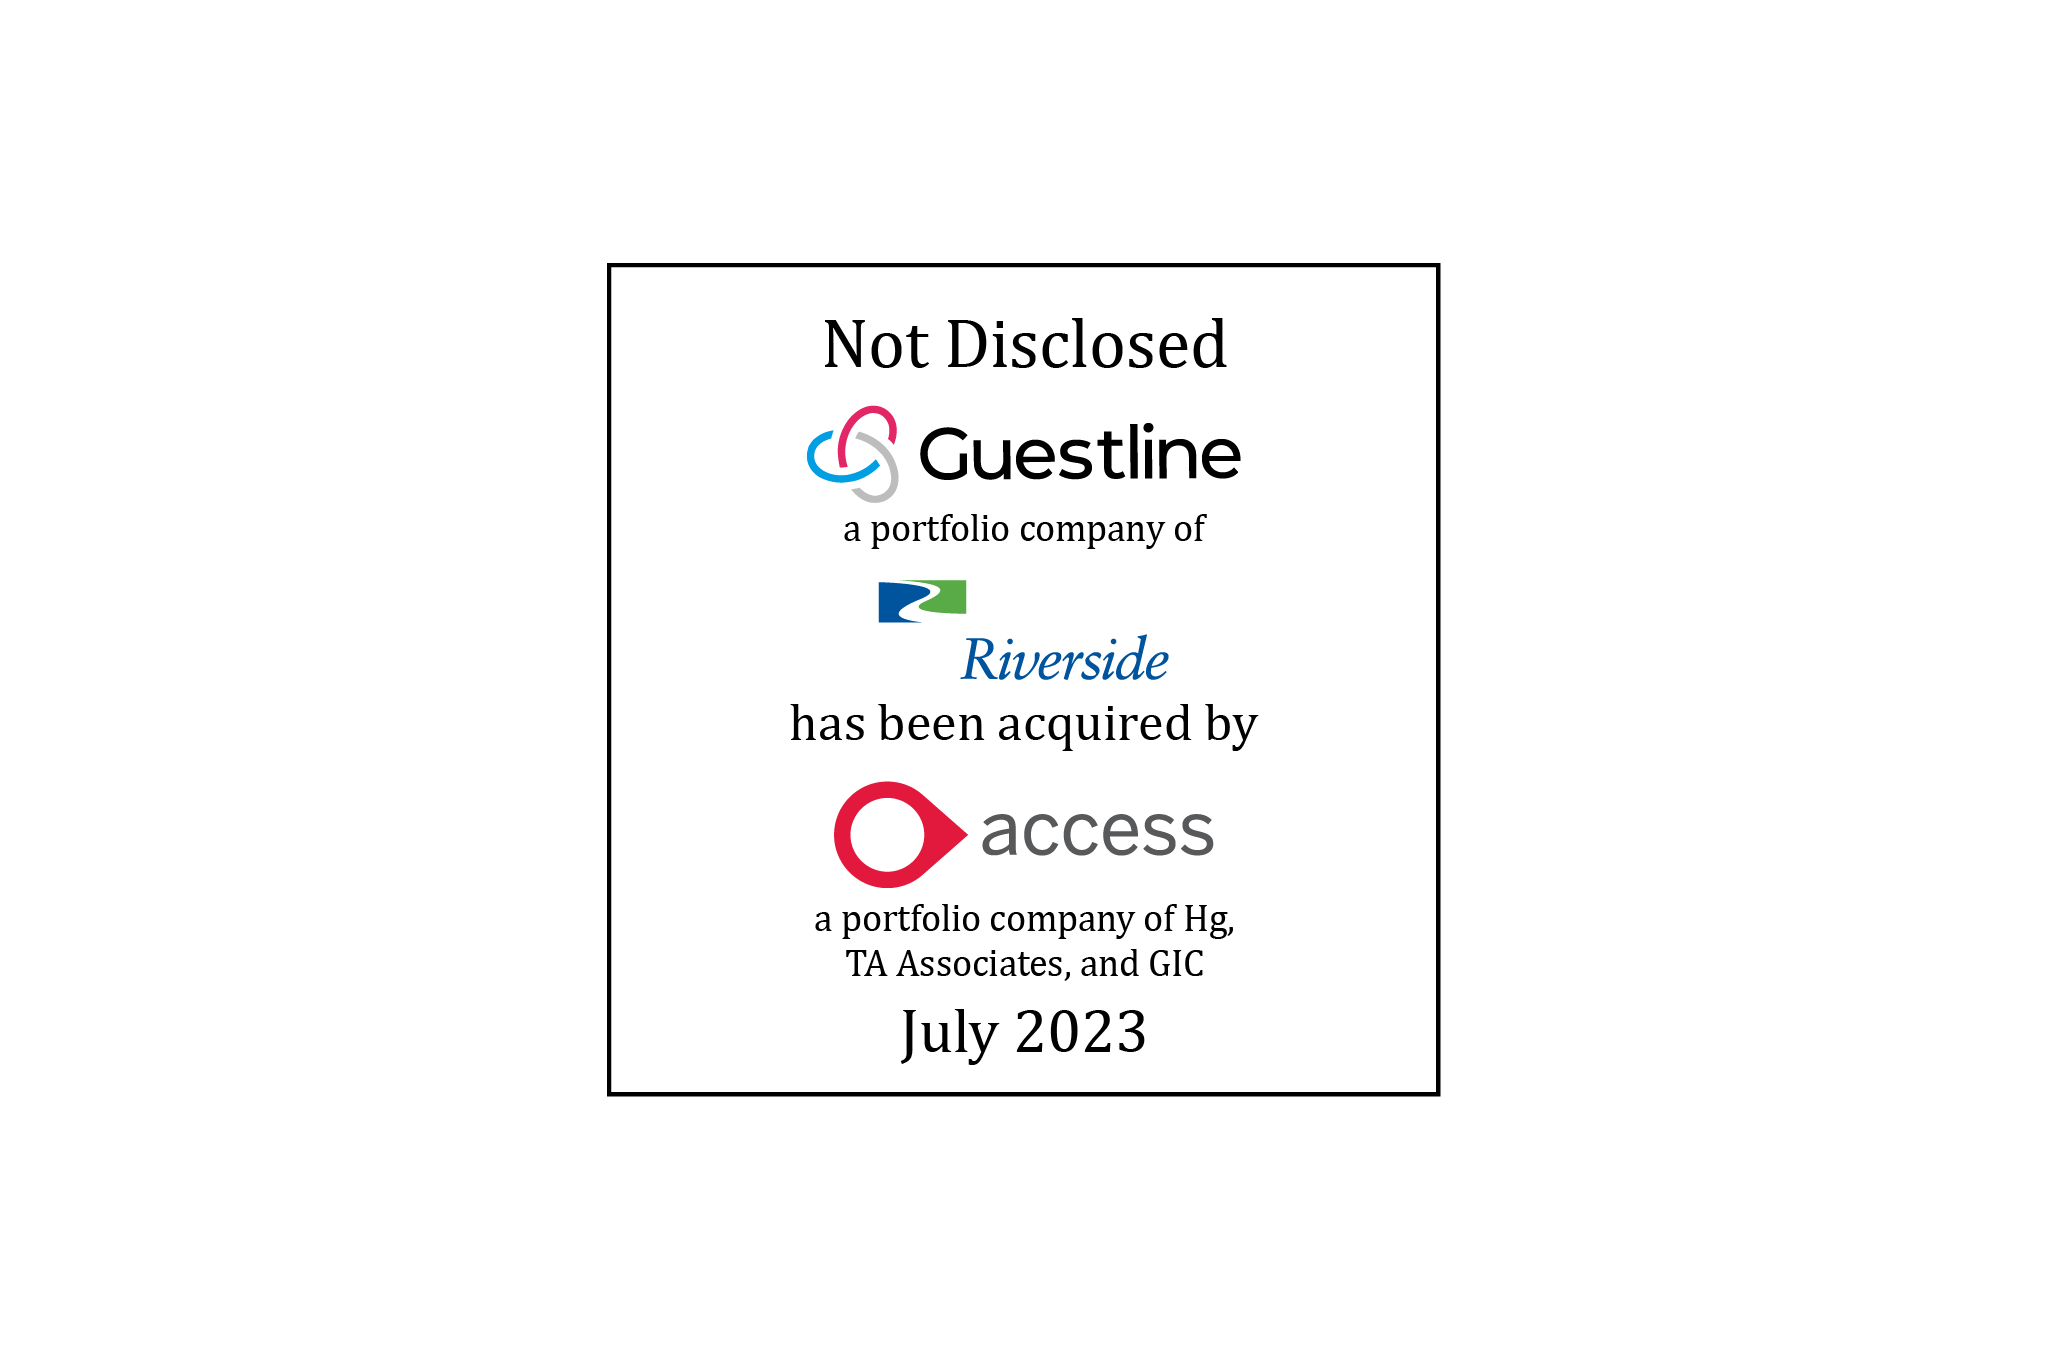 Not Disclosed | Guestline, a portfolio company of the Riverside Company, in connection with its acquisition by The Access Group, a portfolio company of Hg Capital, TA Associates, and GIC | July 2023